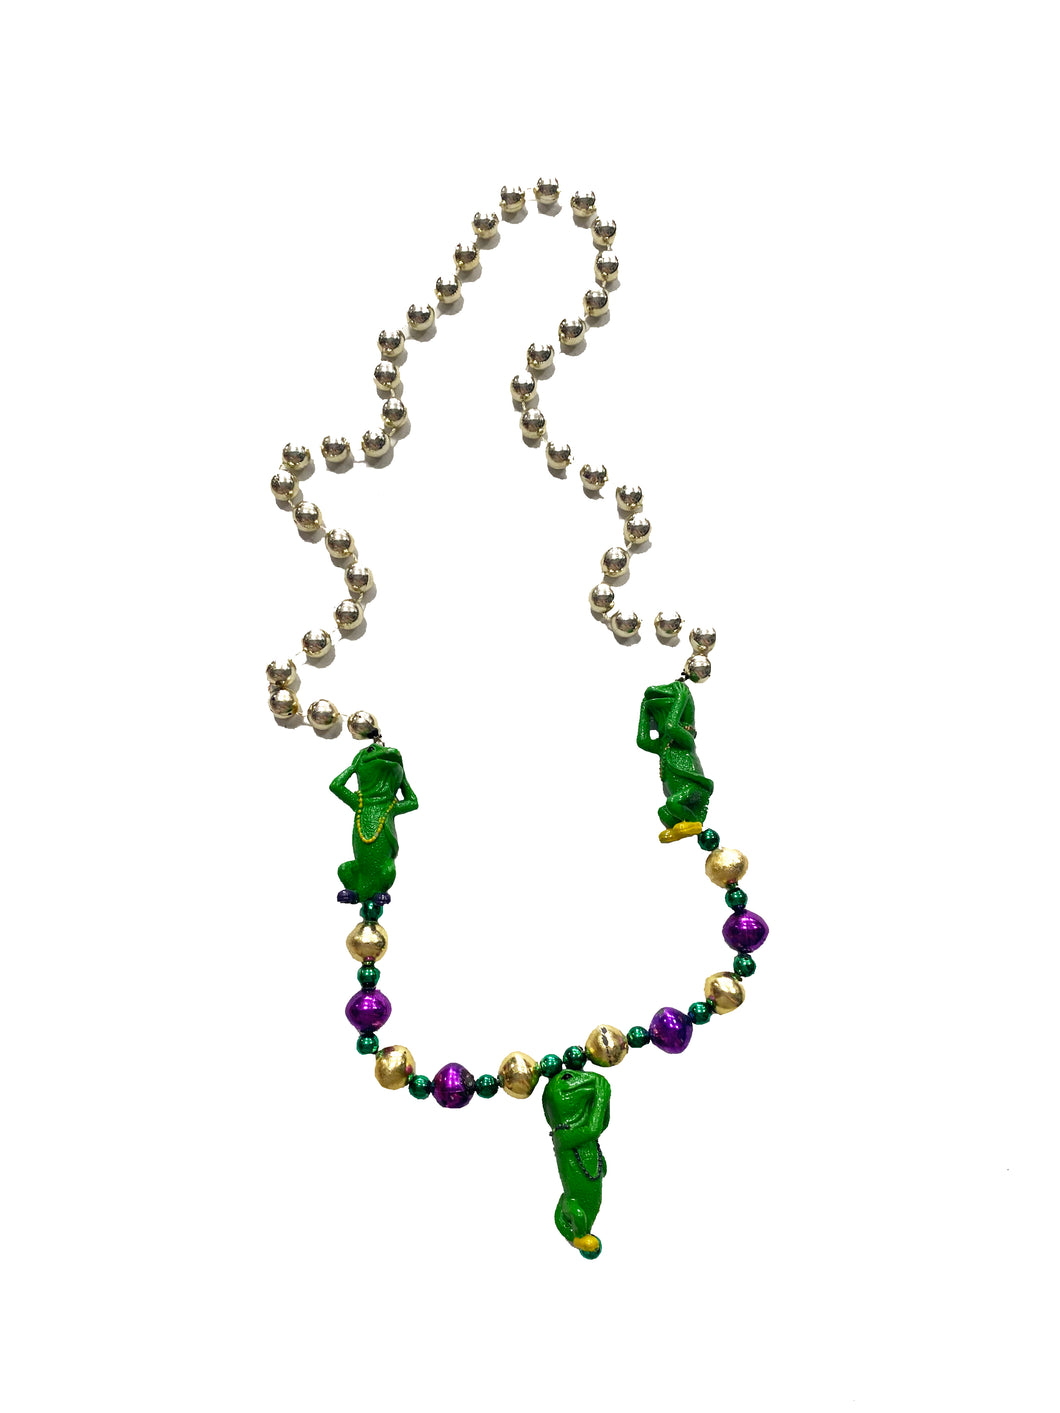 Lizard Trio Hear, See, Speak No Evil on Purple, Green, and Gold Specialty Bead